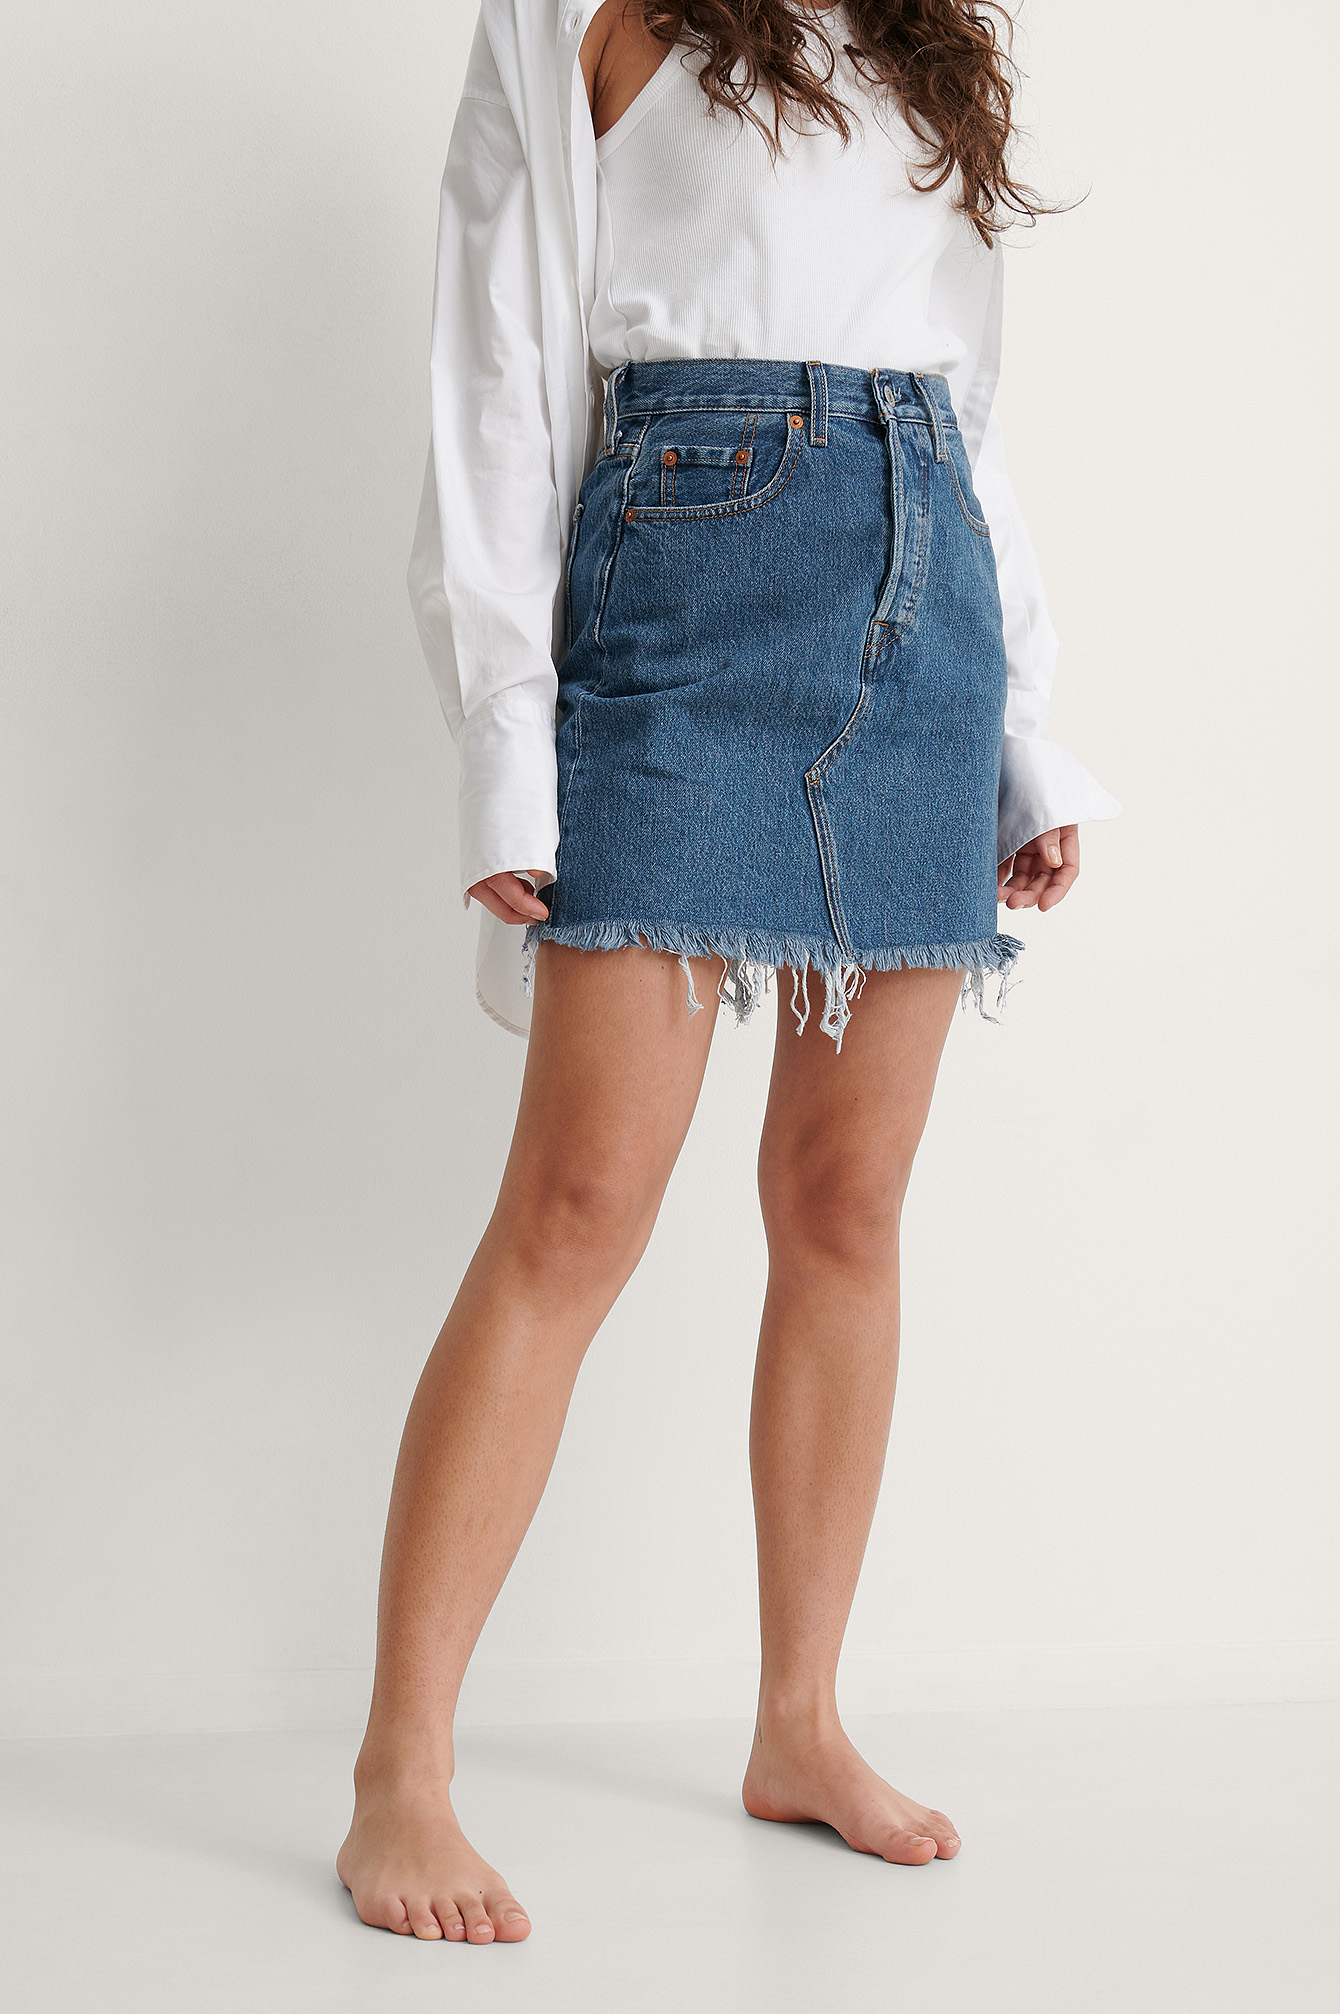 Meet In The Middle Iconic Bf Skirt